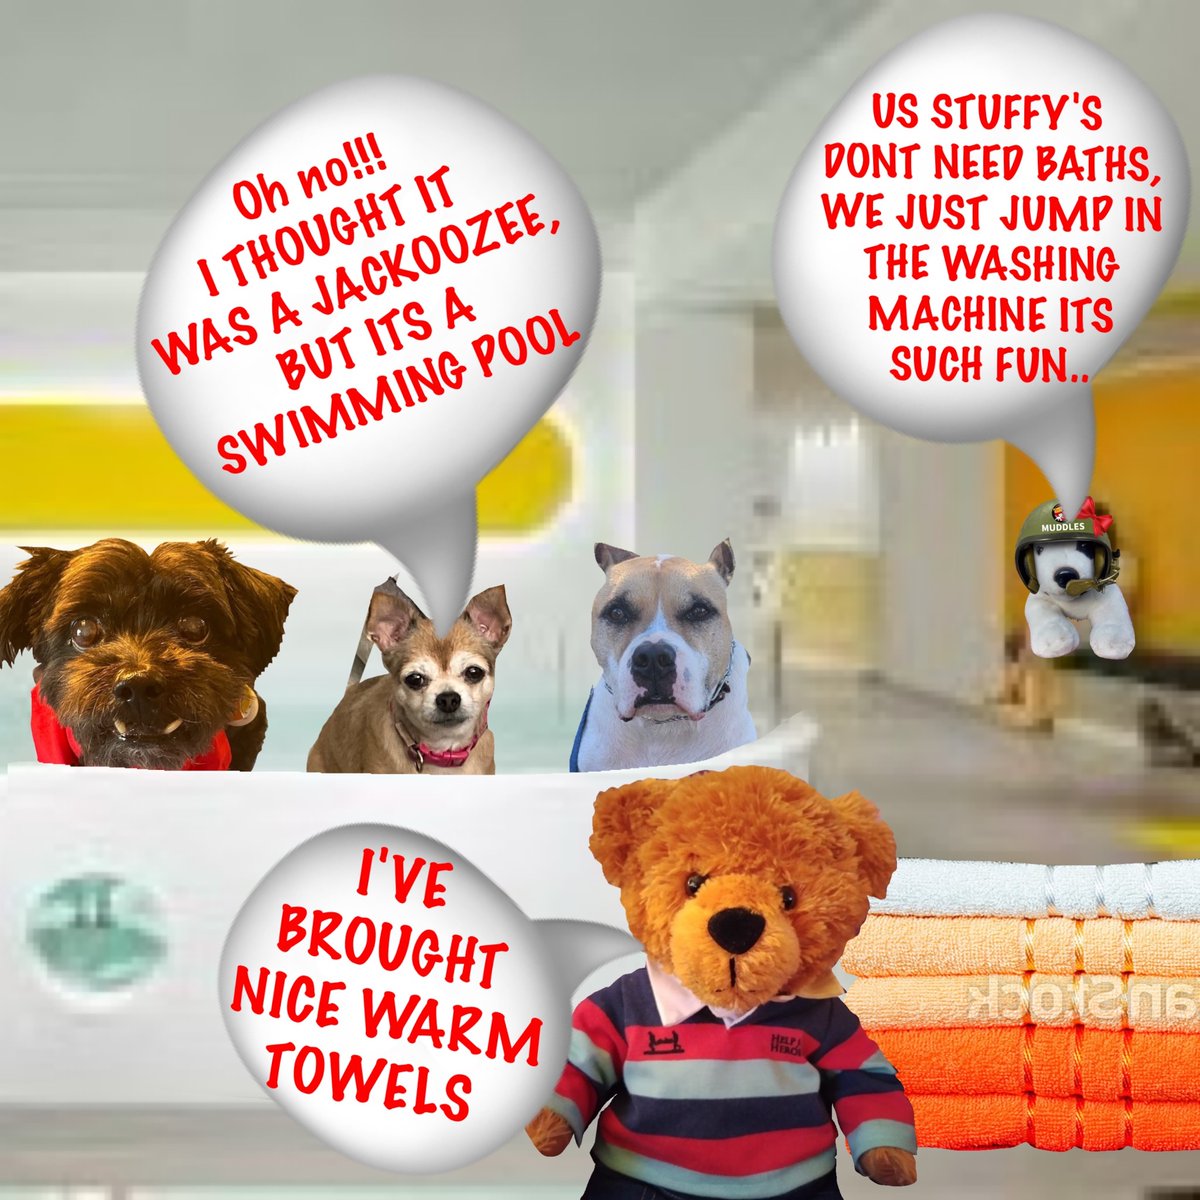 17 #zzst 🎉🍸🤣🍷😱🍻😄😉🎶😃😵‍💫☺️🛀🏻🍹🎵😂💦👍🏻
OH DEAR POGUE IS A BIT DISSAPOINTED..... 
'POGUE - THE JACKOOZEE IS OUTSIDE'    ALL READYY TO USE
YEHHHH